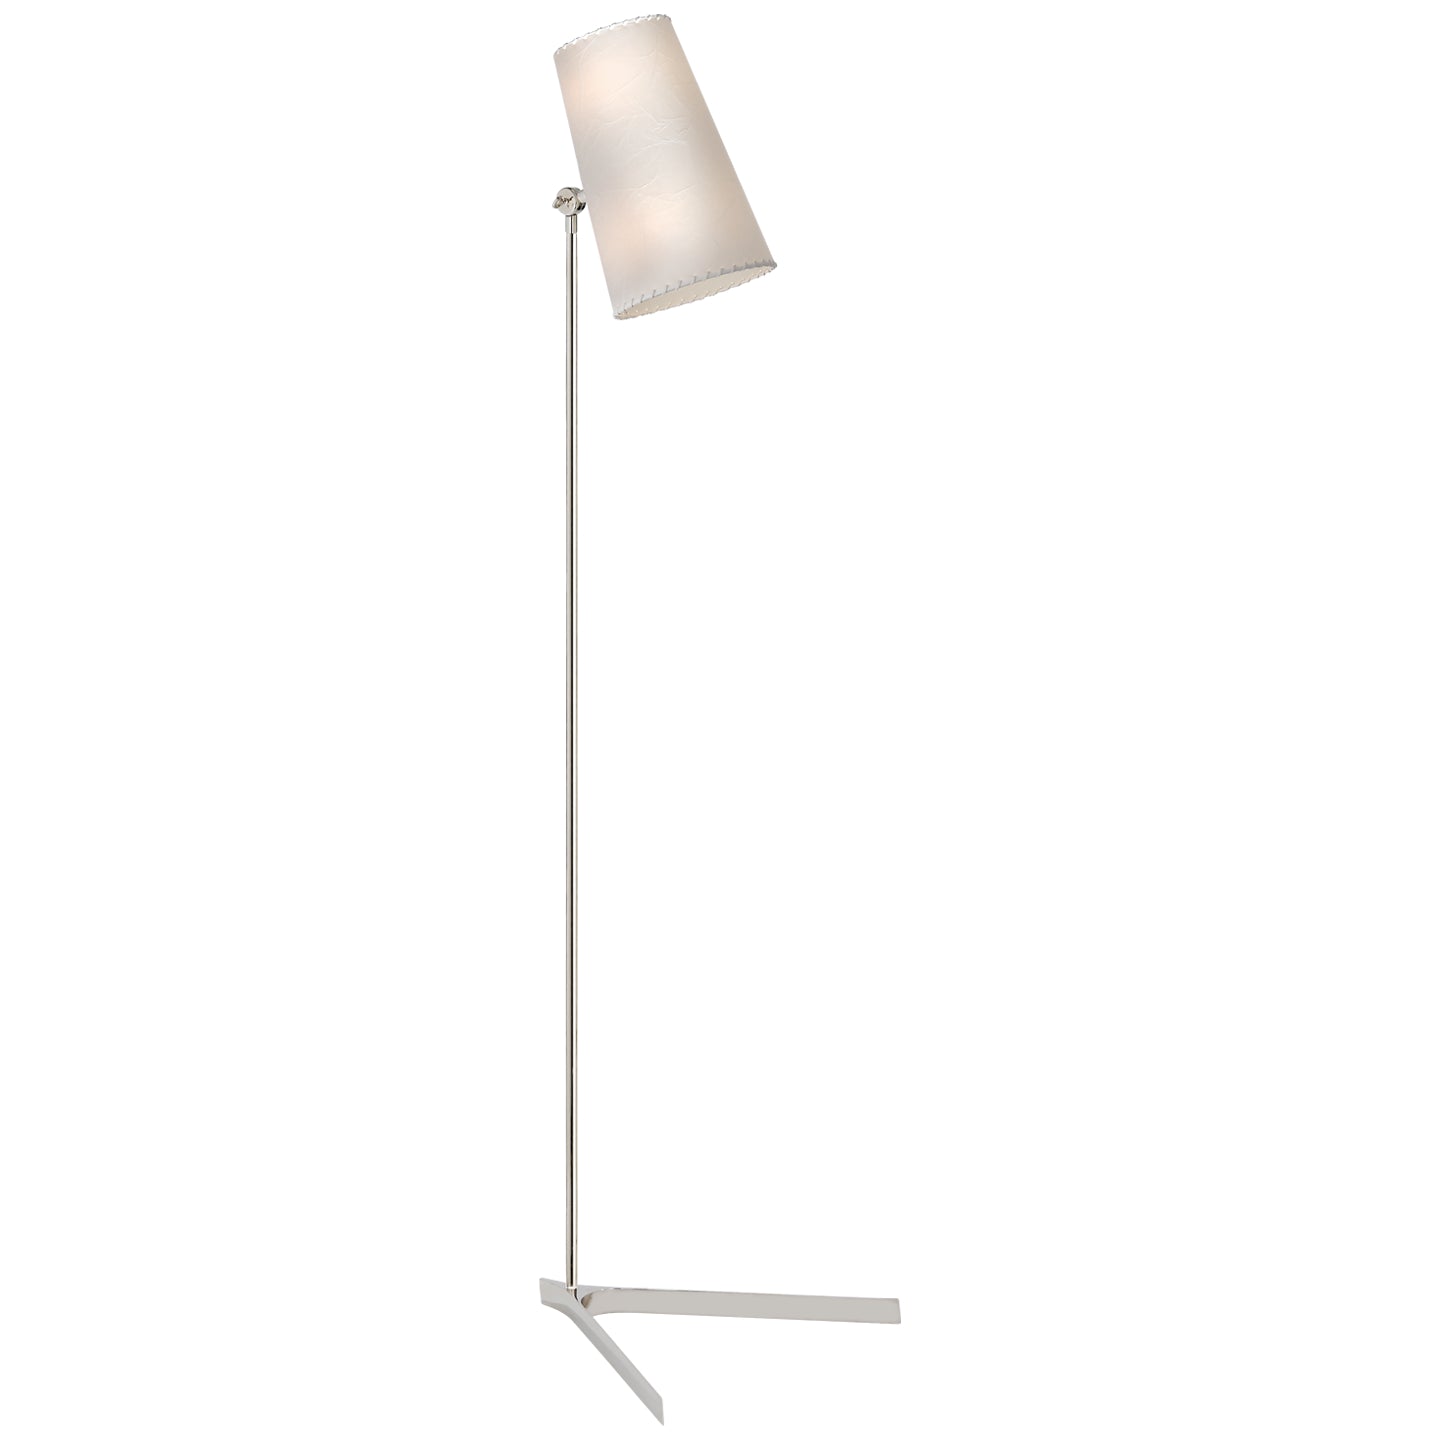 Two Light Floor Lamp from the Arpont collection in Polished Nickel finish